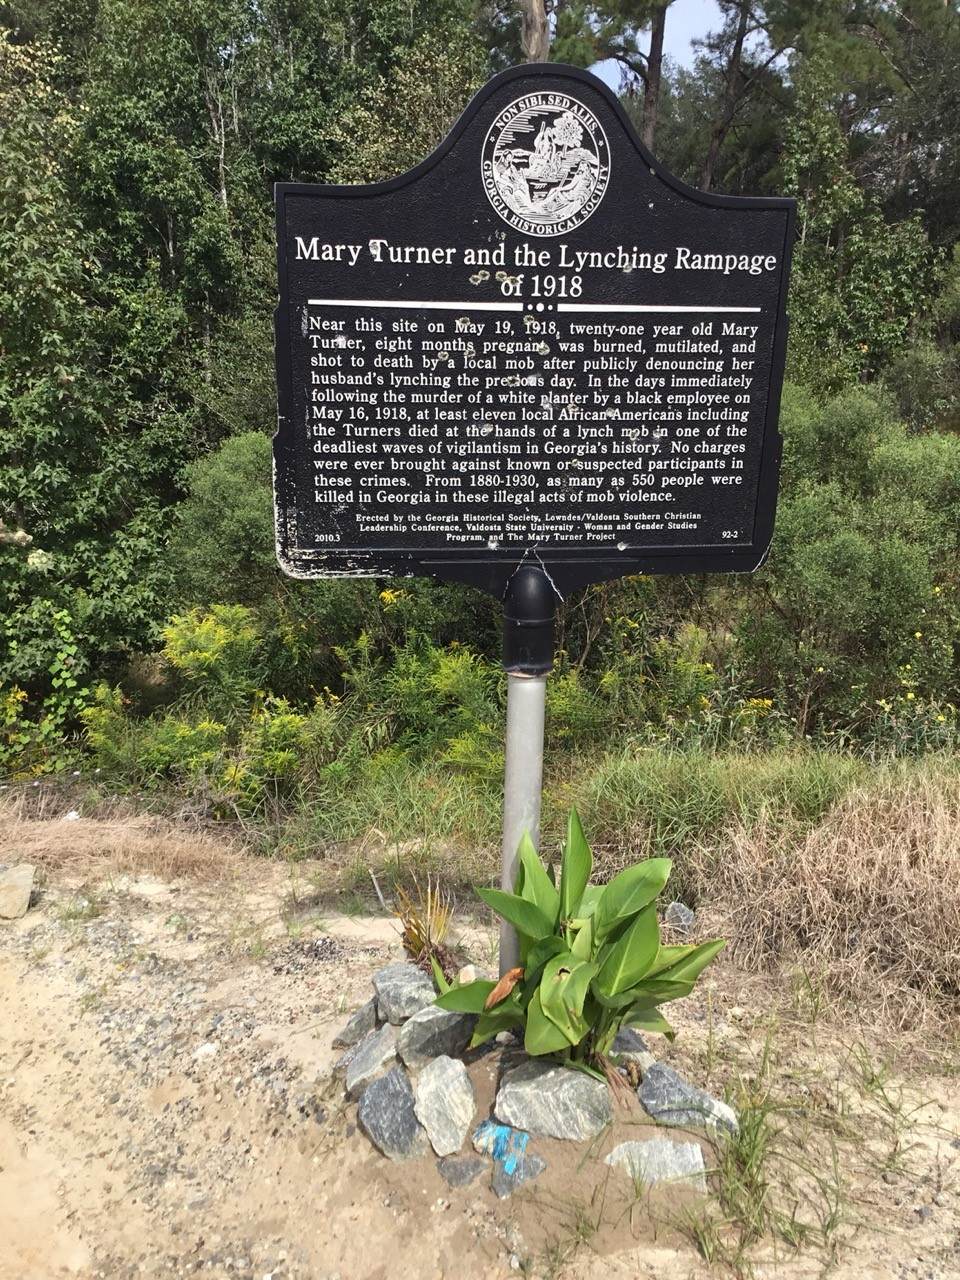 A bullet-ridden historical marker memorializing the lynching of Mary Turner and the lynching rampage of 1918 will be on display at the National Center for Civil and Human Rights.